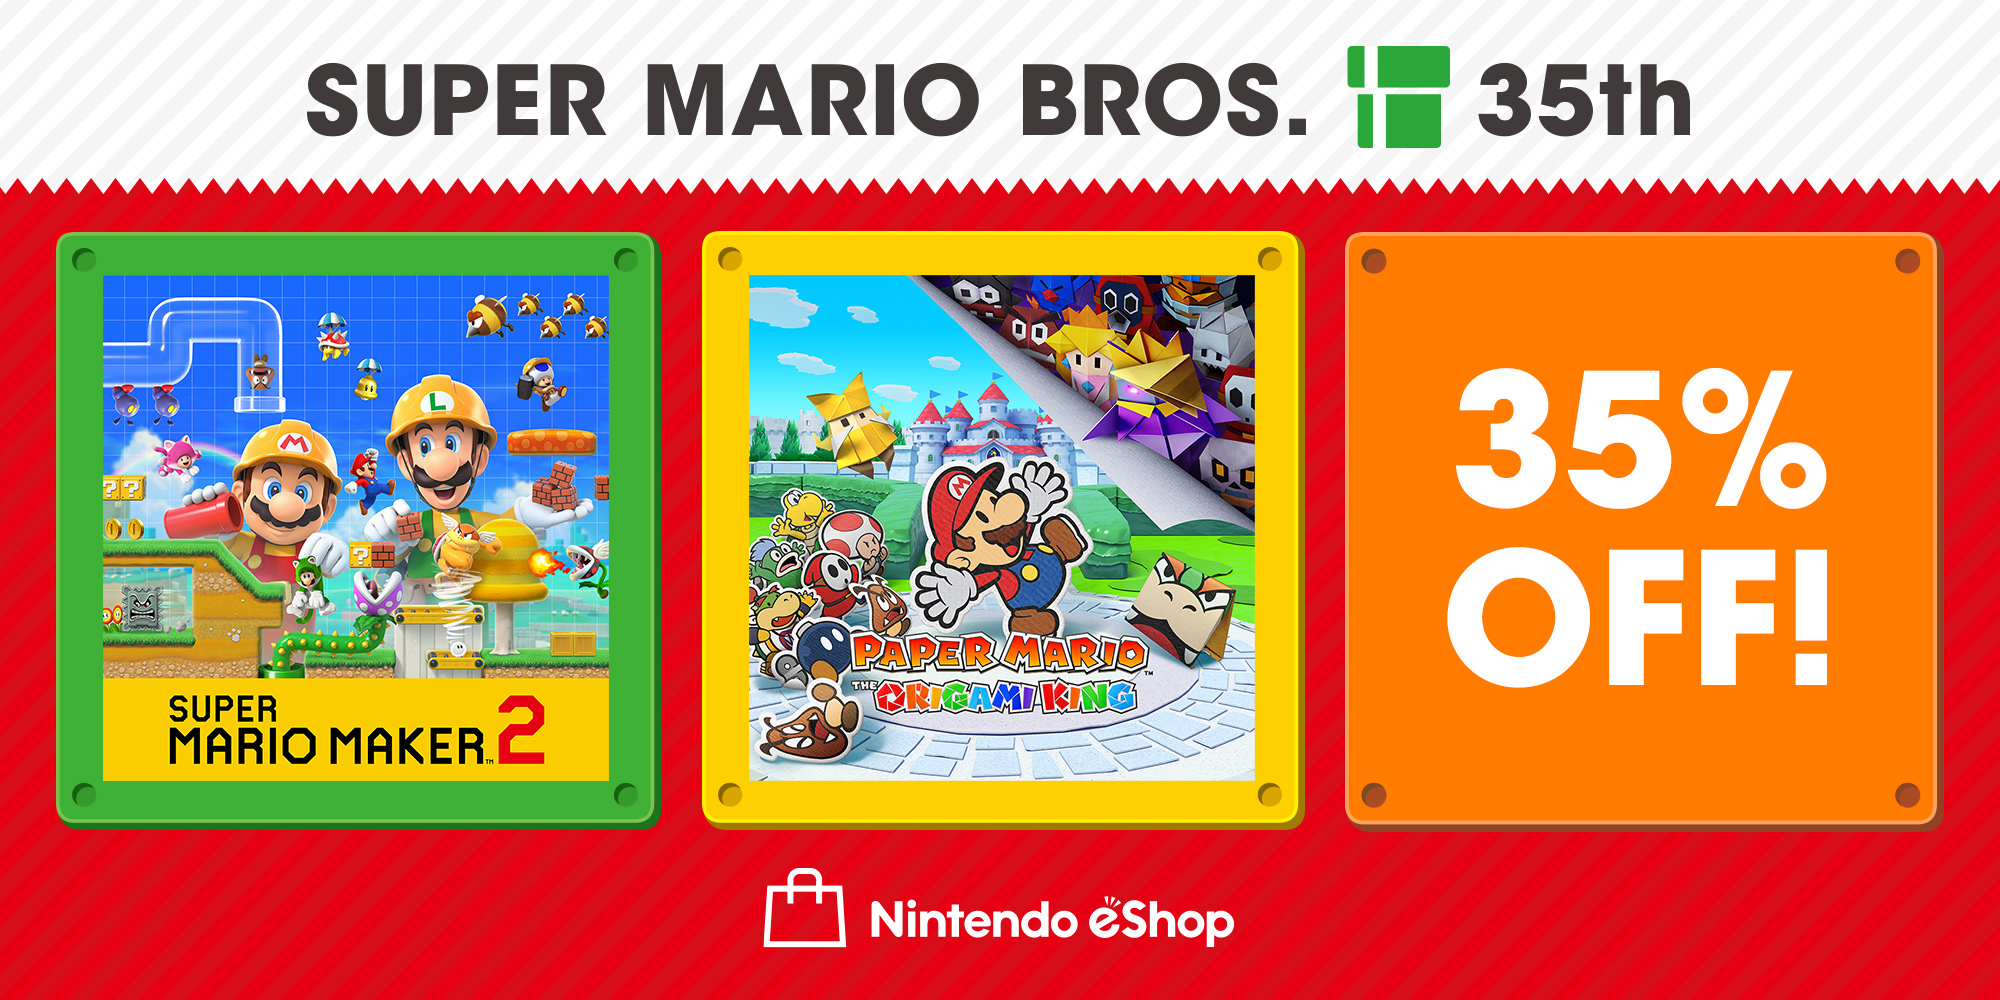 Get 35% off Paper Mario: The Origami King and Super Mario Maker 2!